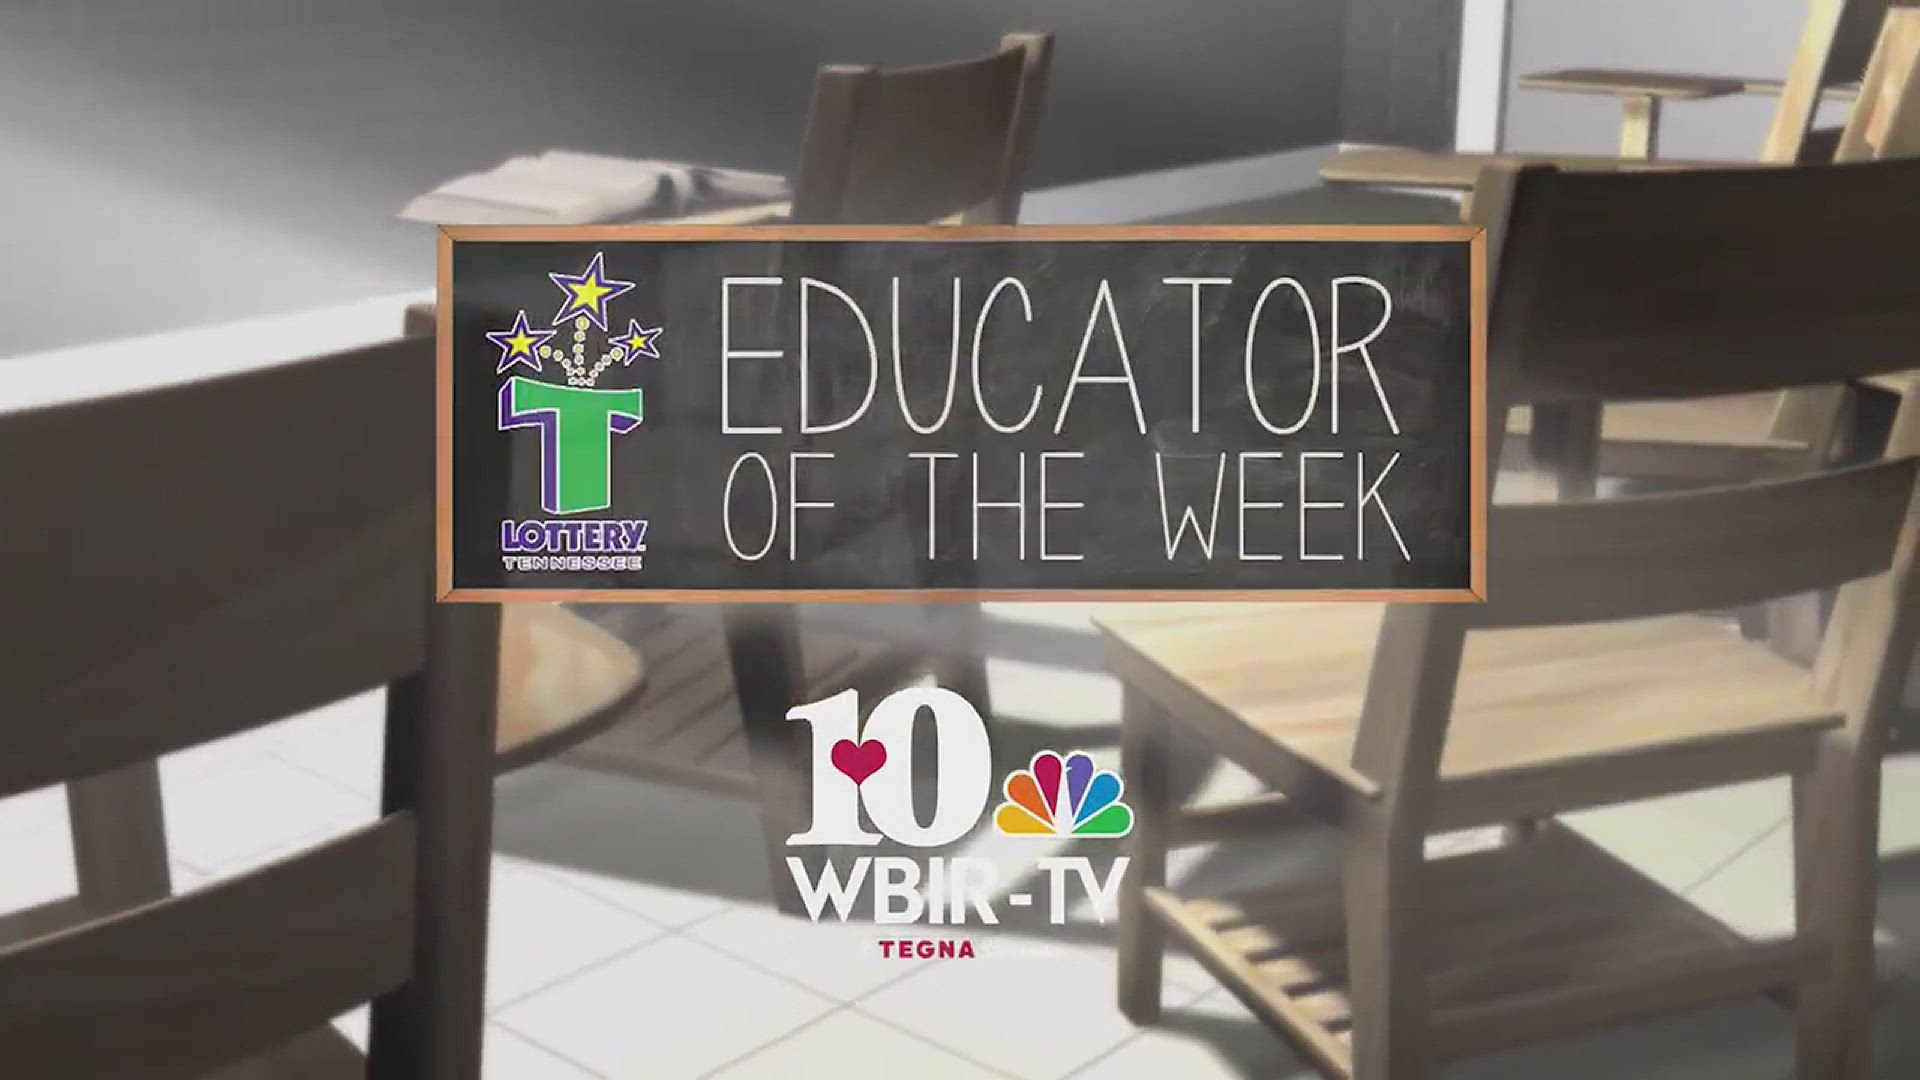 The Educator of the Week 3/13 is Denise May